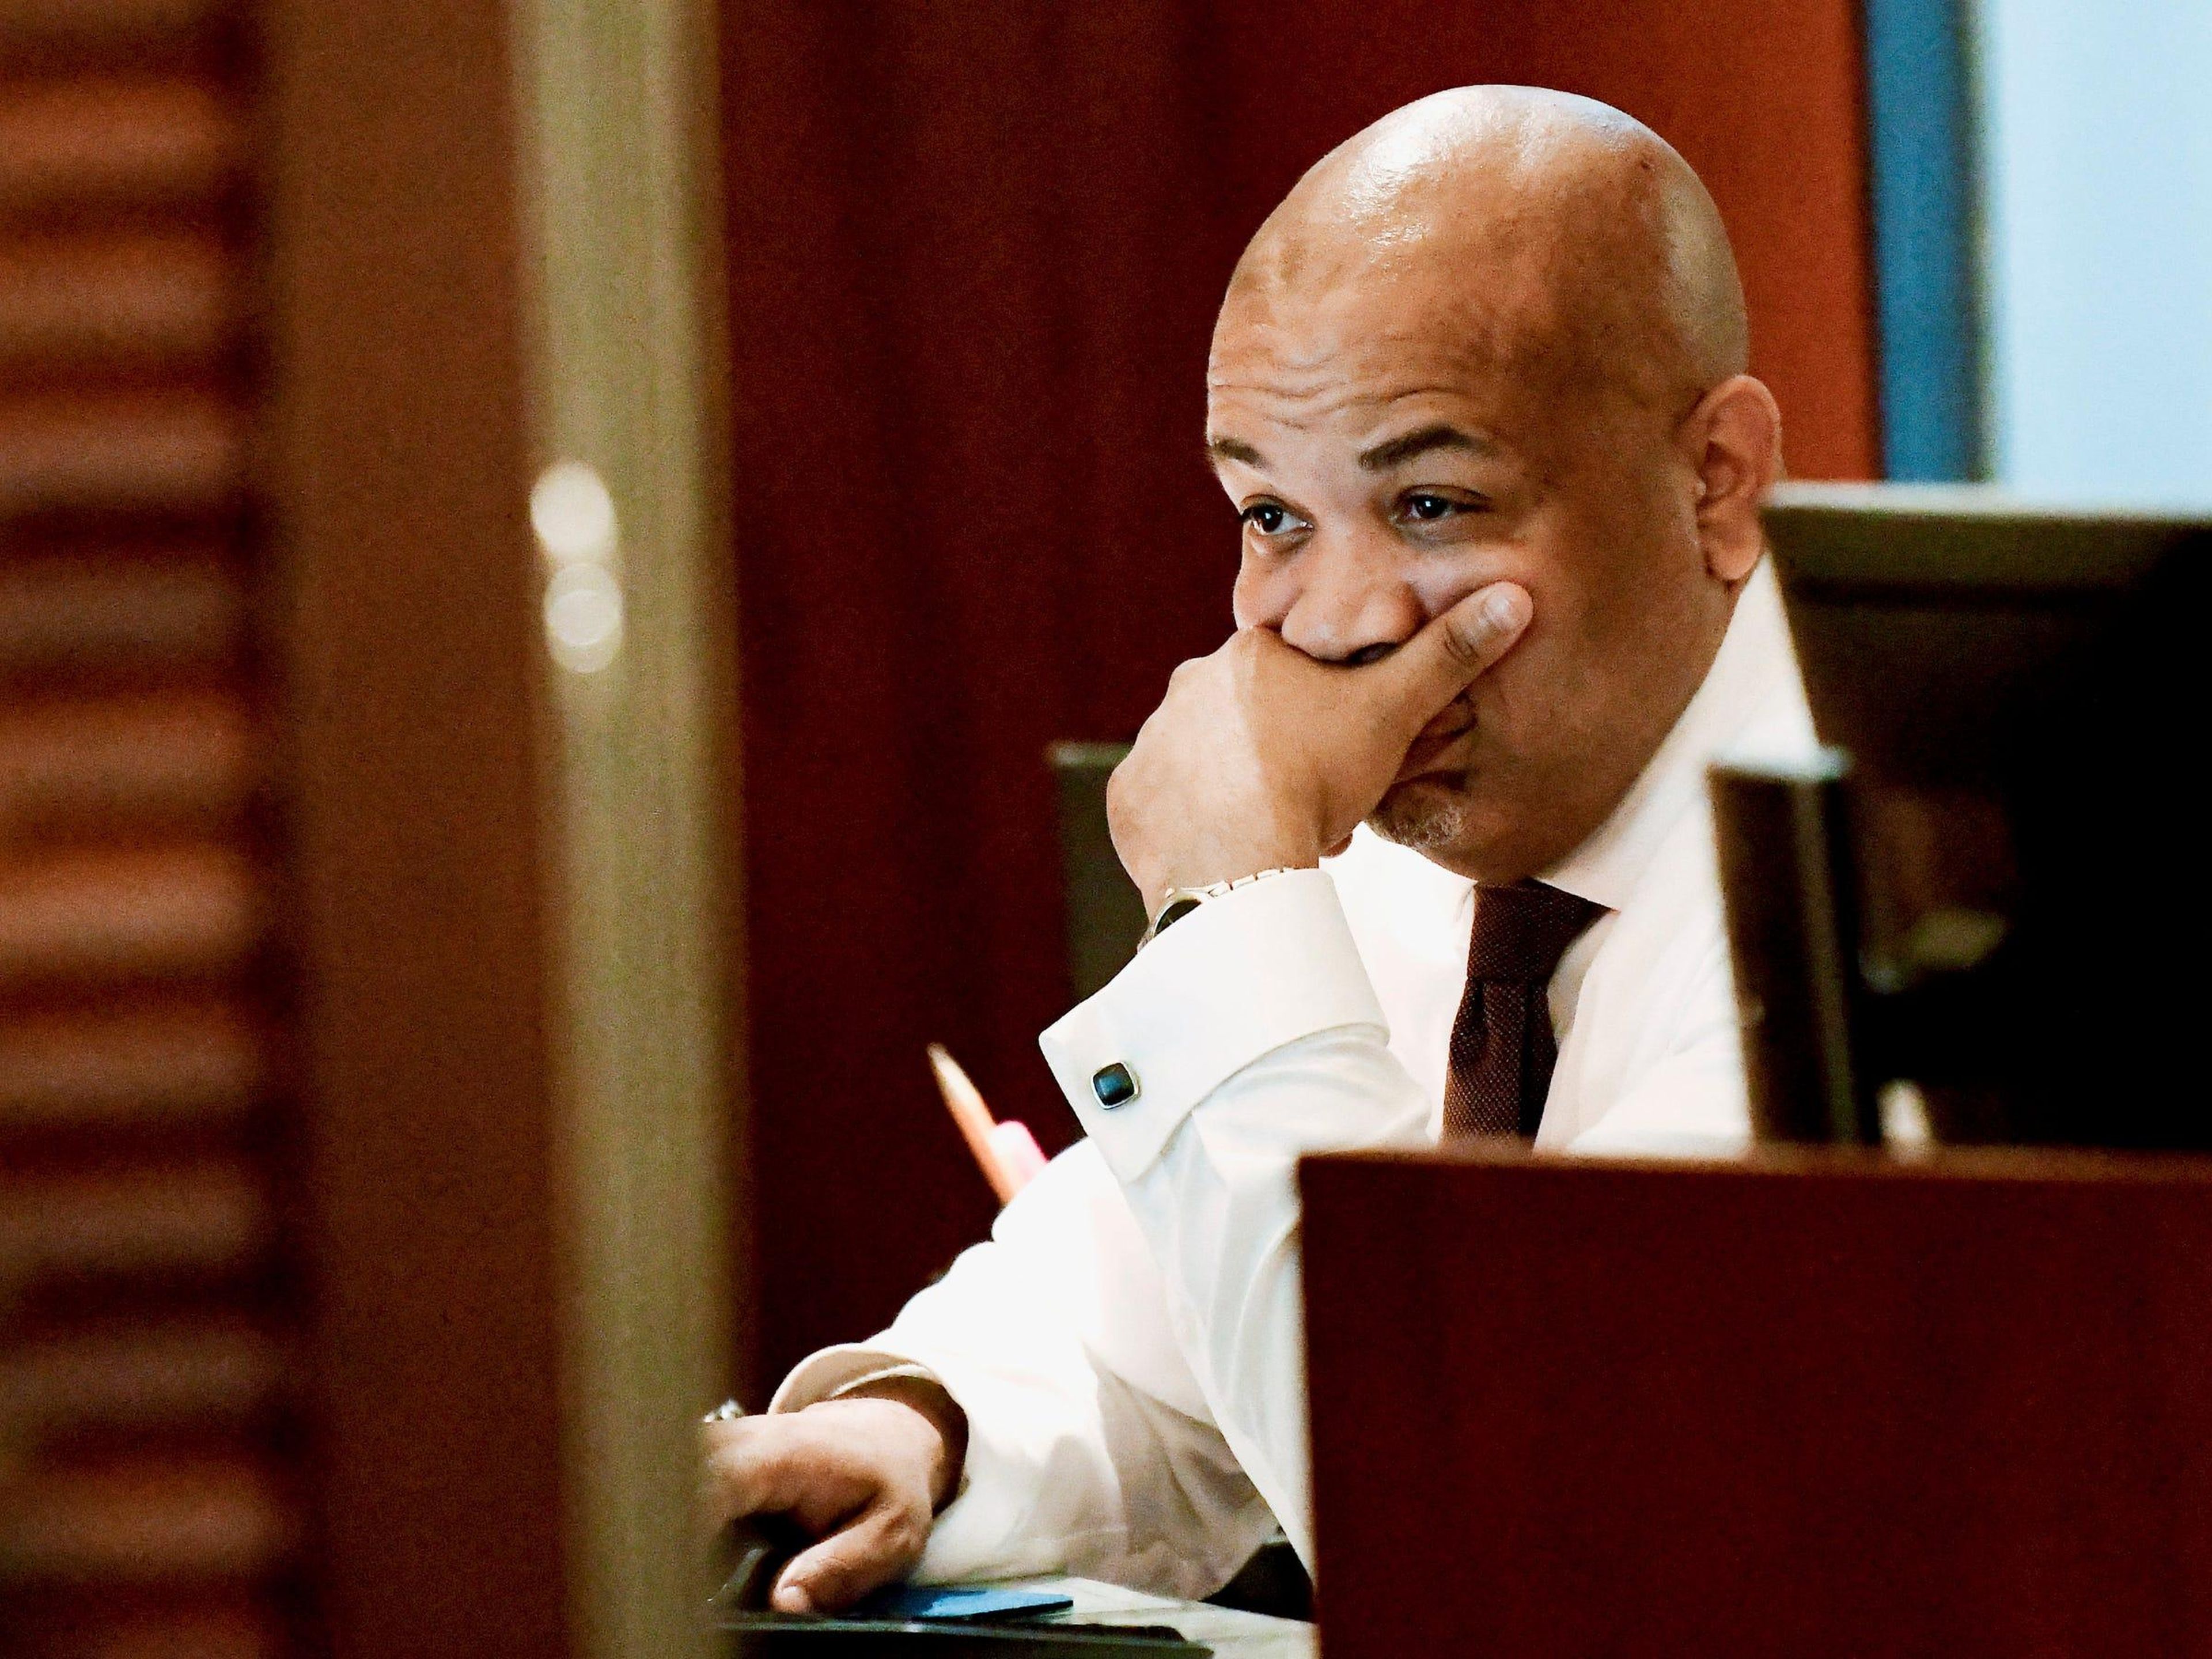 New York state Assembly Speaker Carl Heastie looks at his computer screen.